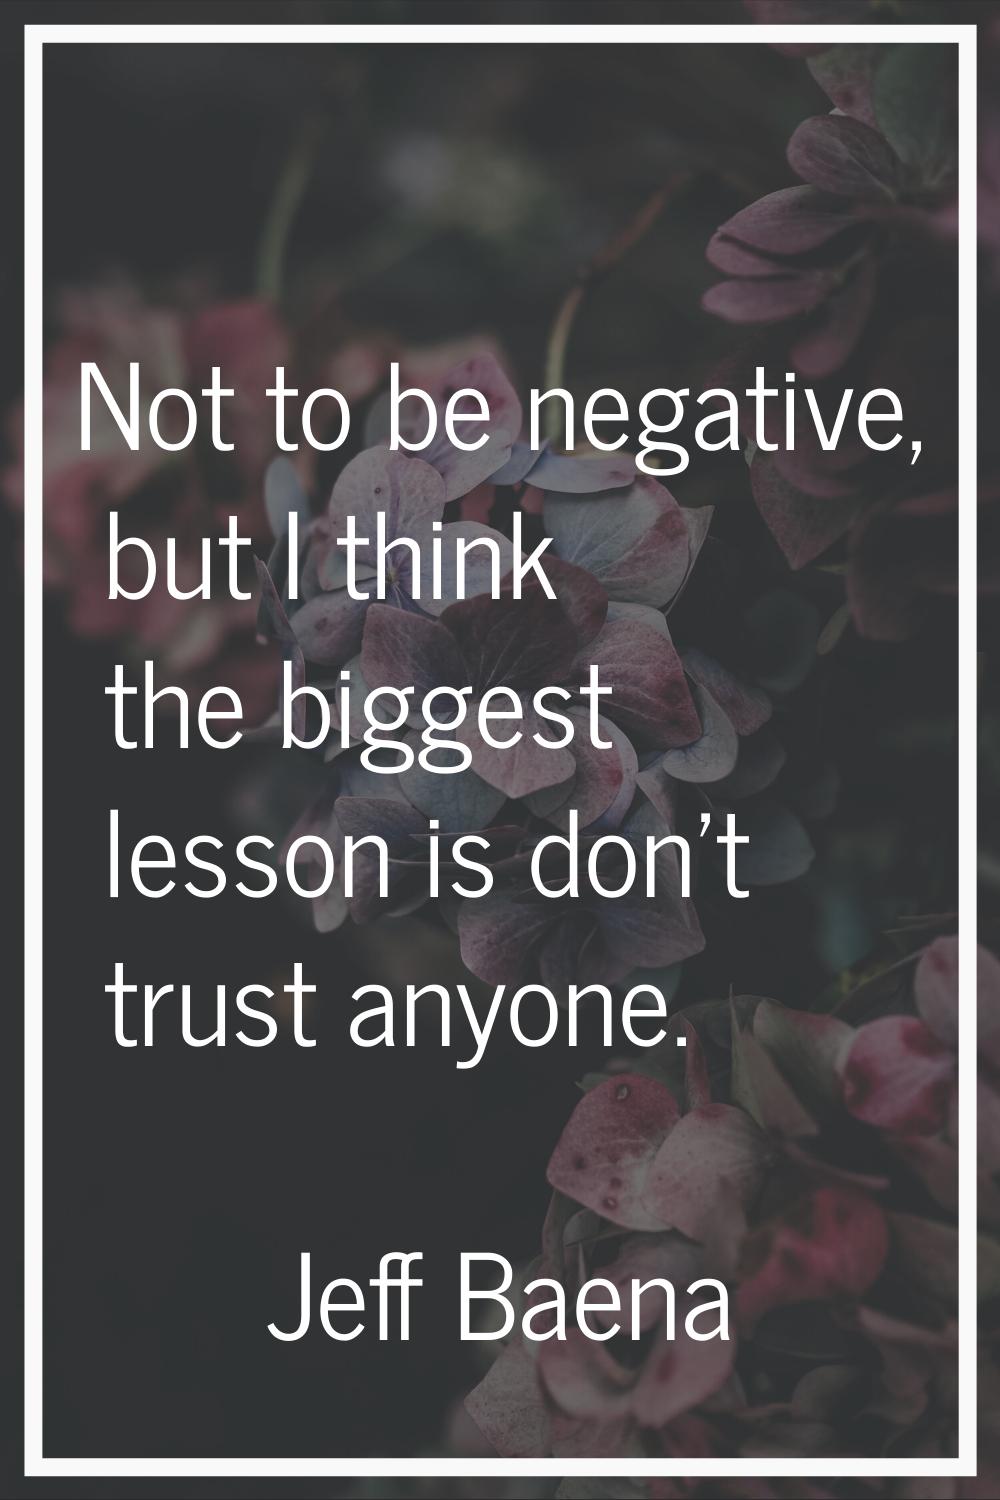 Not to be negative, but I think the biggest lesson is don't trust anyone.